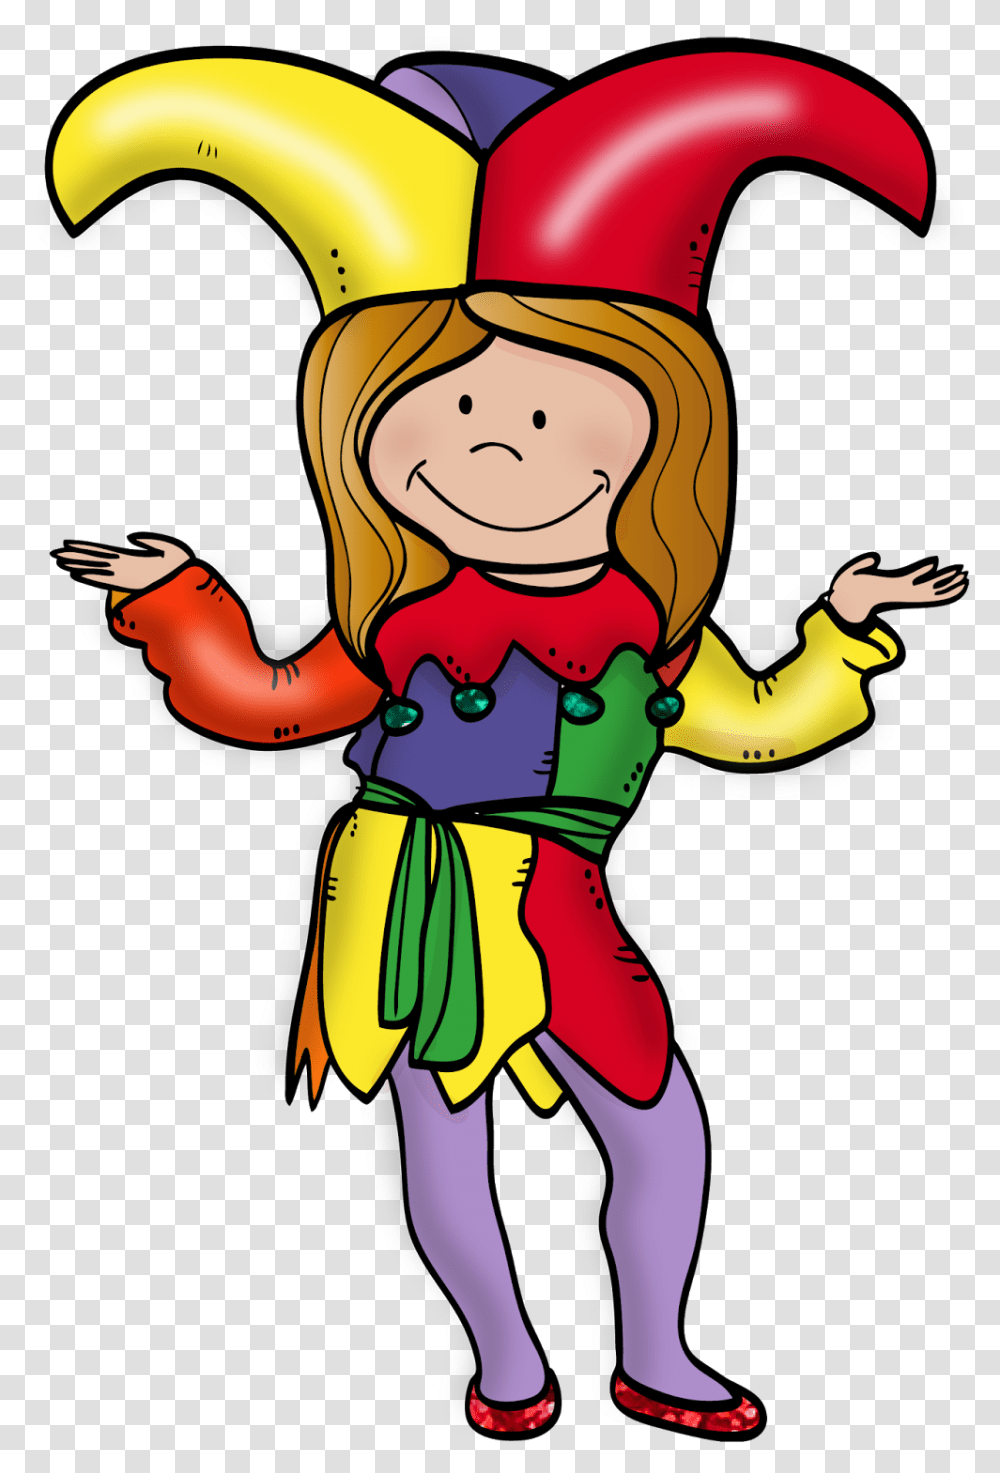 Easter Amp April Fools April's Fool Day In French, Costume, Elf, Chef Transparent Png